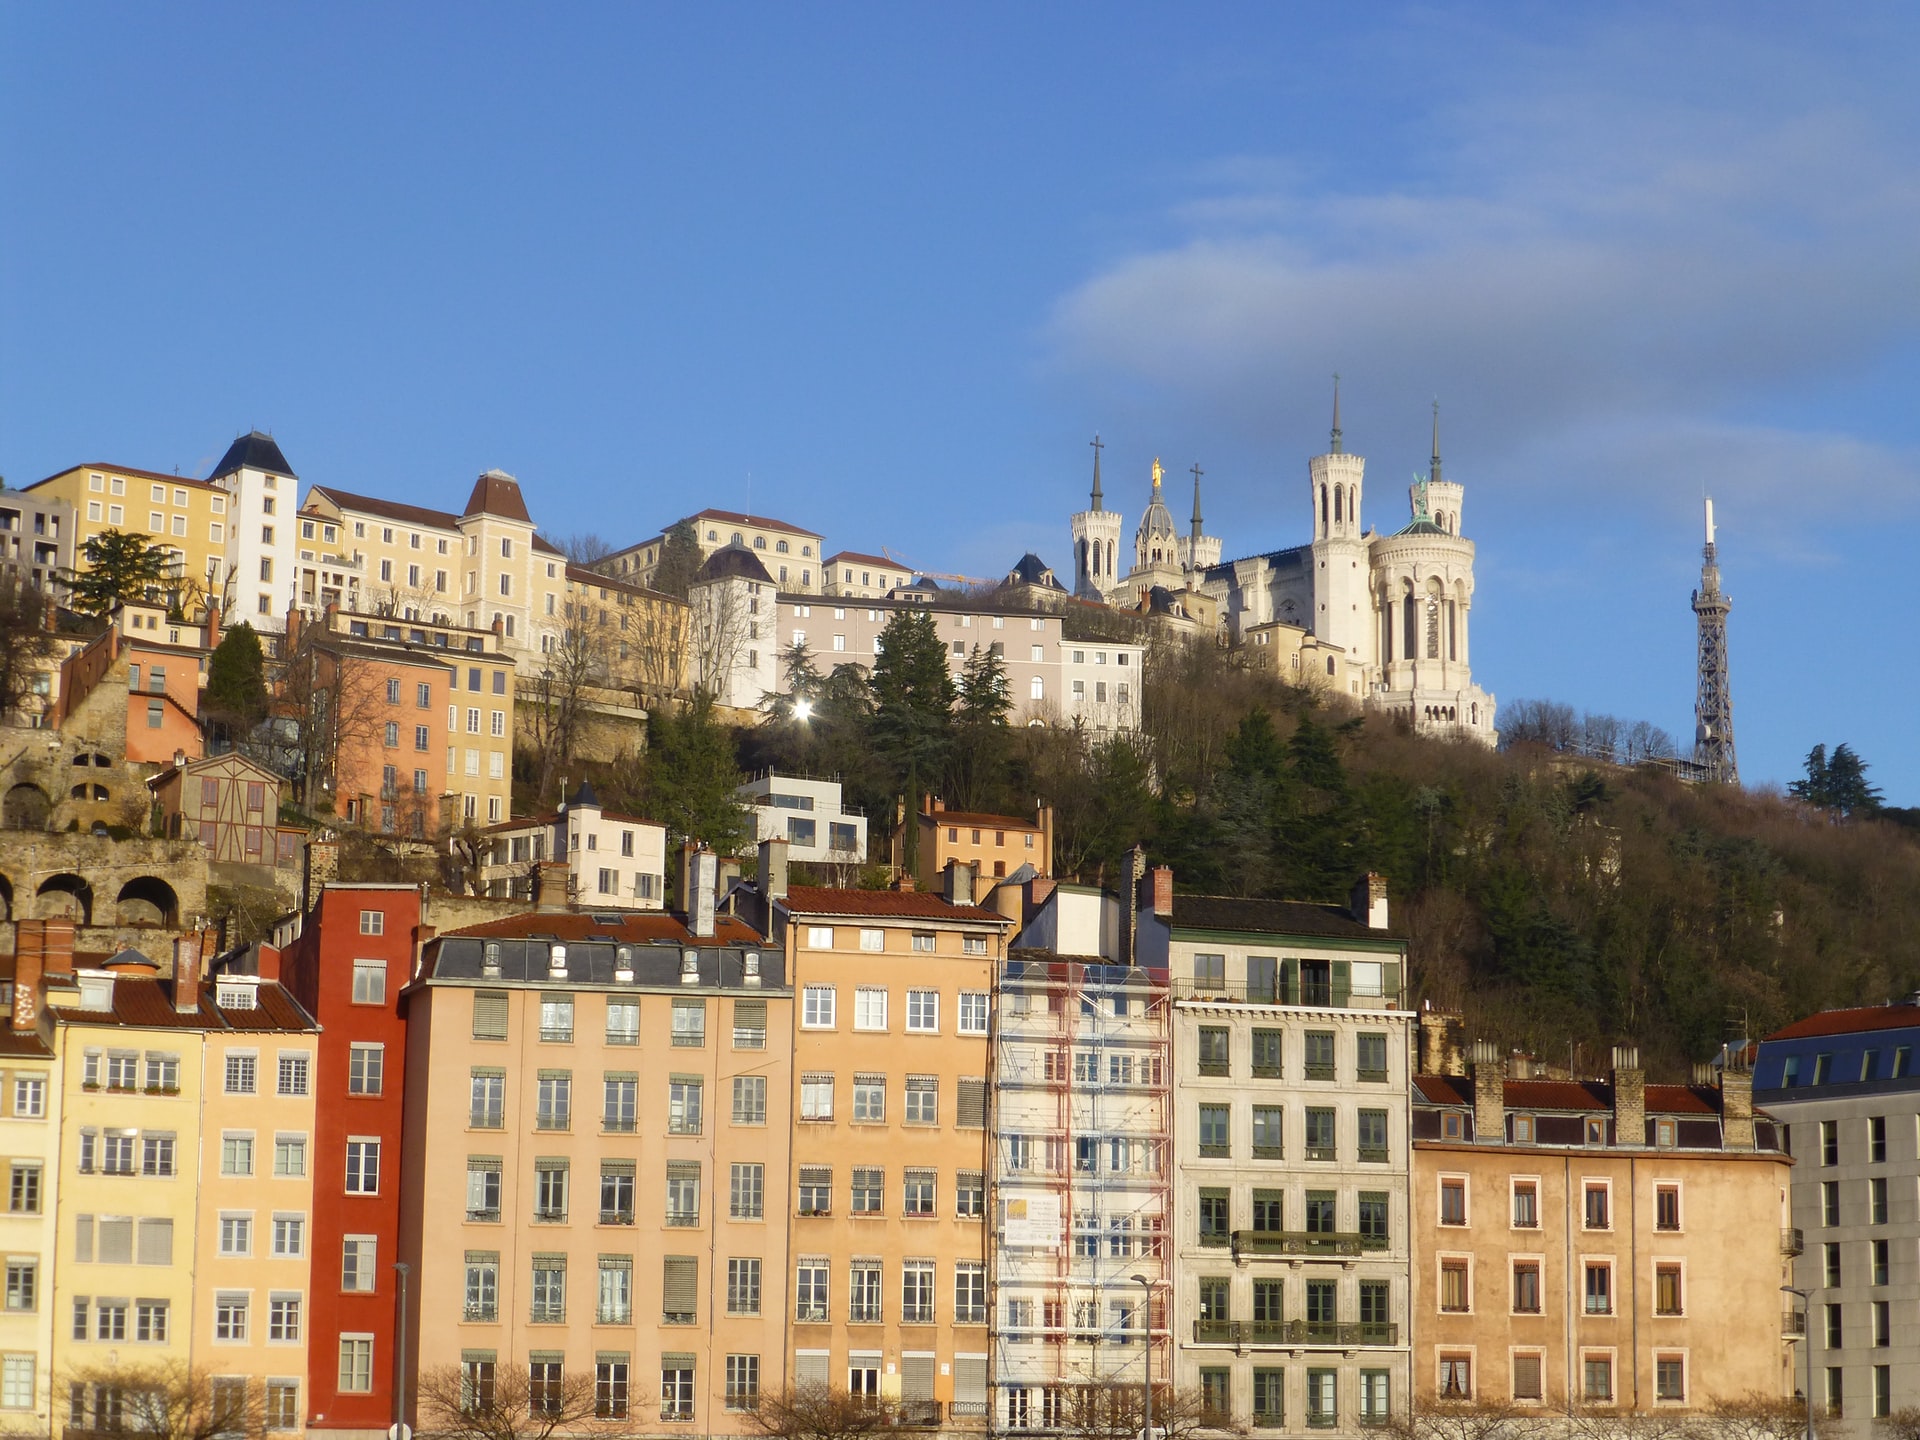 Home to Roman, Medieval and Renaissance-era buildings, Vieux Lyon is a great area to stay for sightseeing and culture.